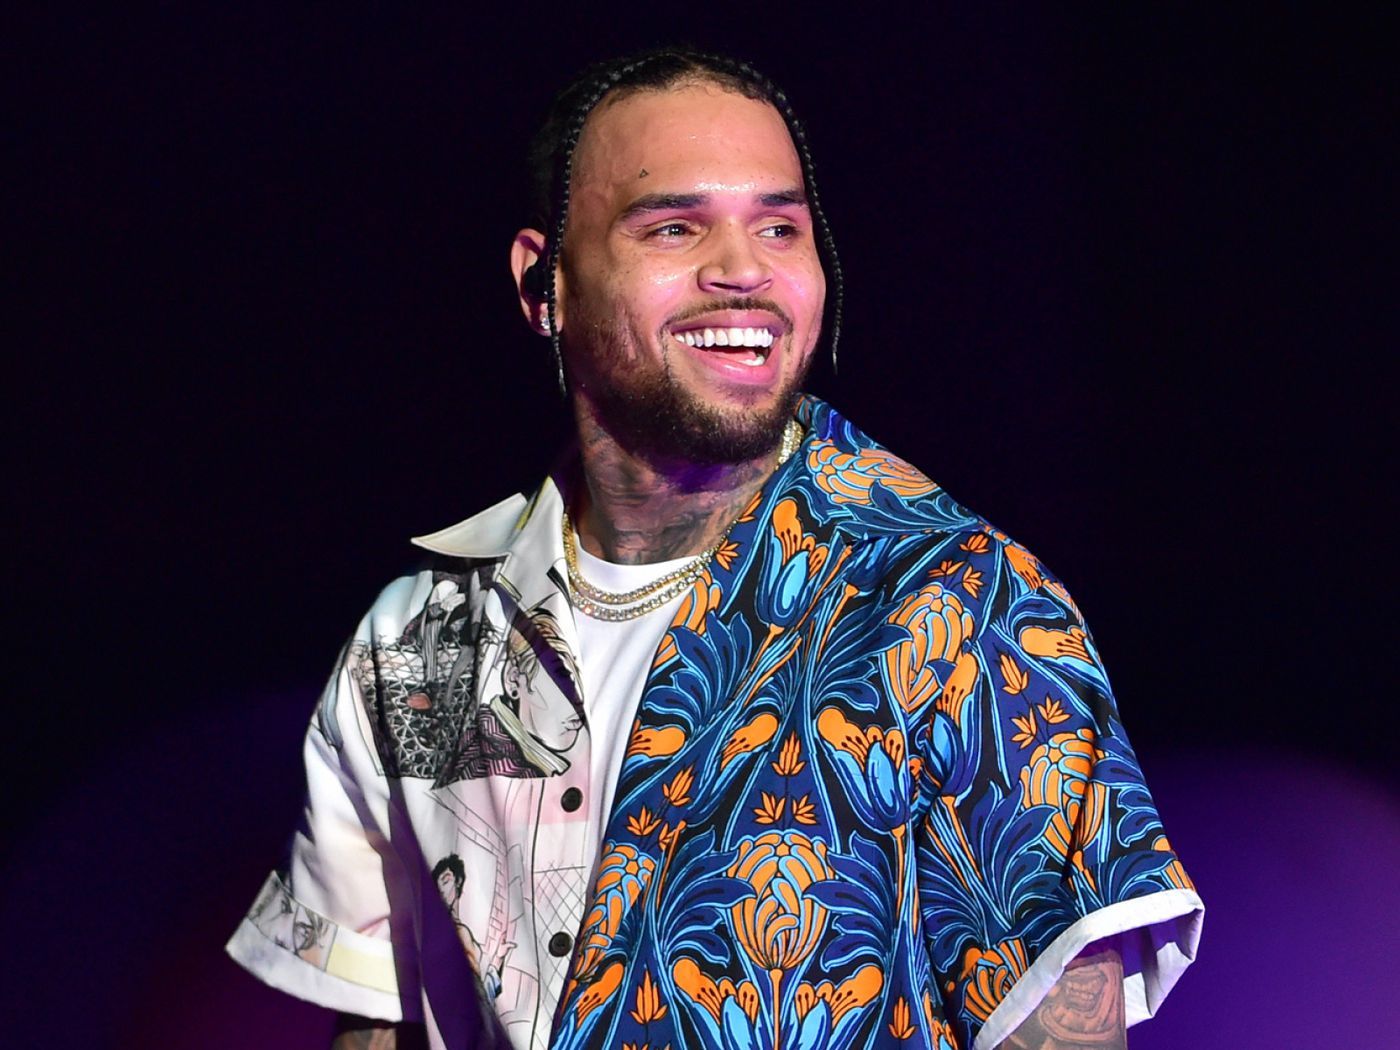 Chris Brown launches dance challenge for “Go Crazy”